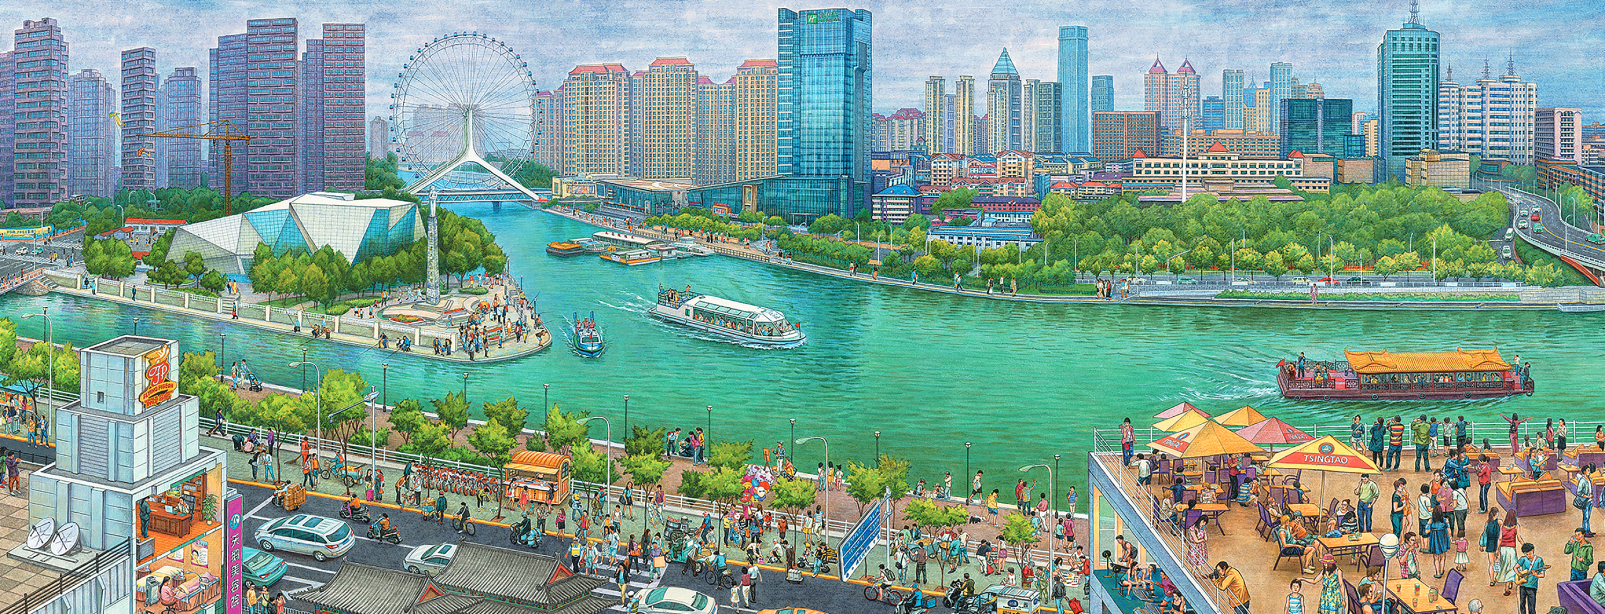 Flowing prosperity: Six facts you may not know about China's Grand Canal